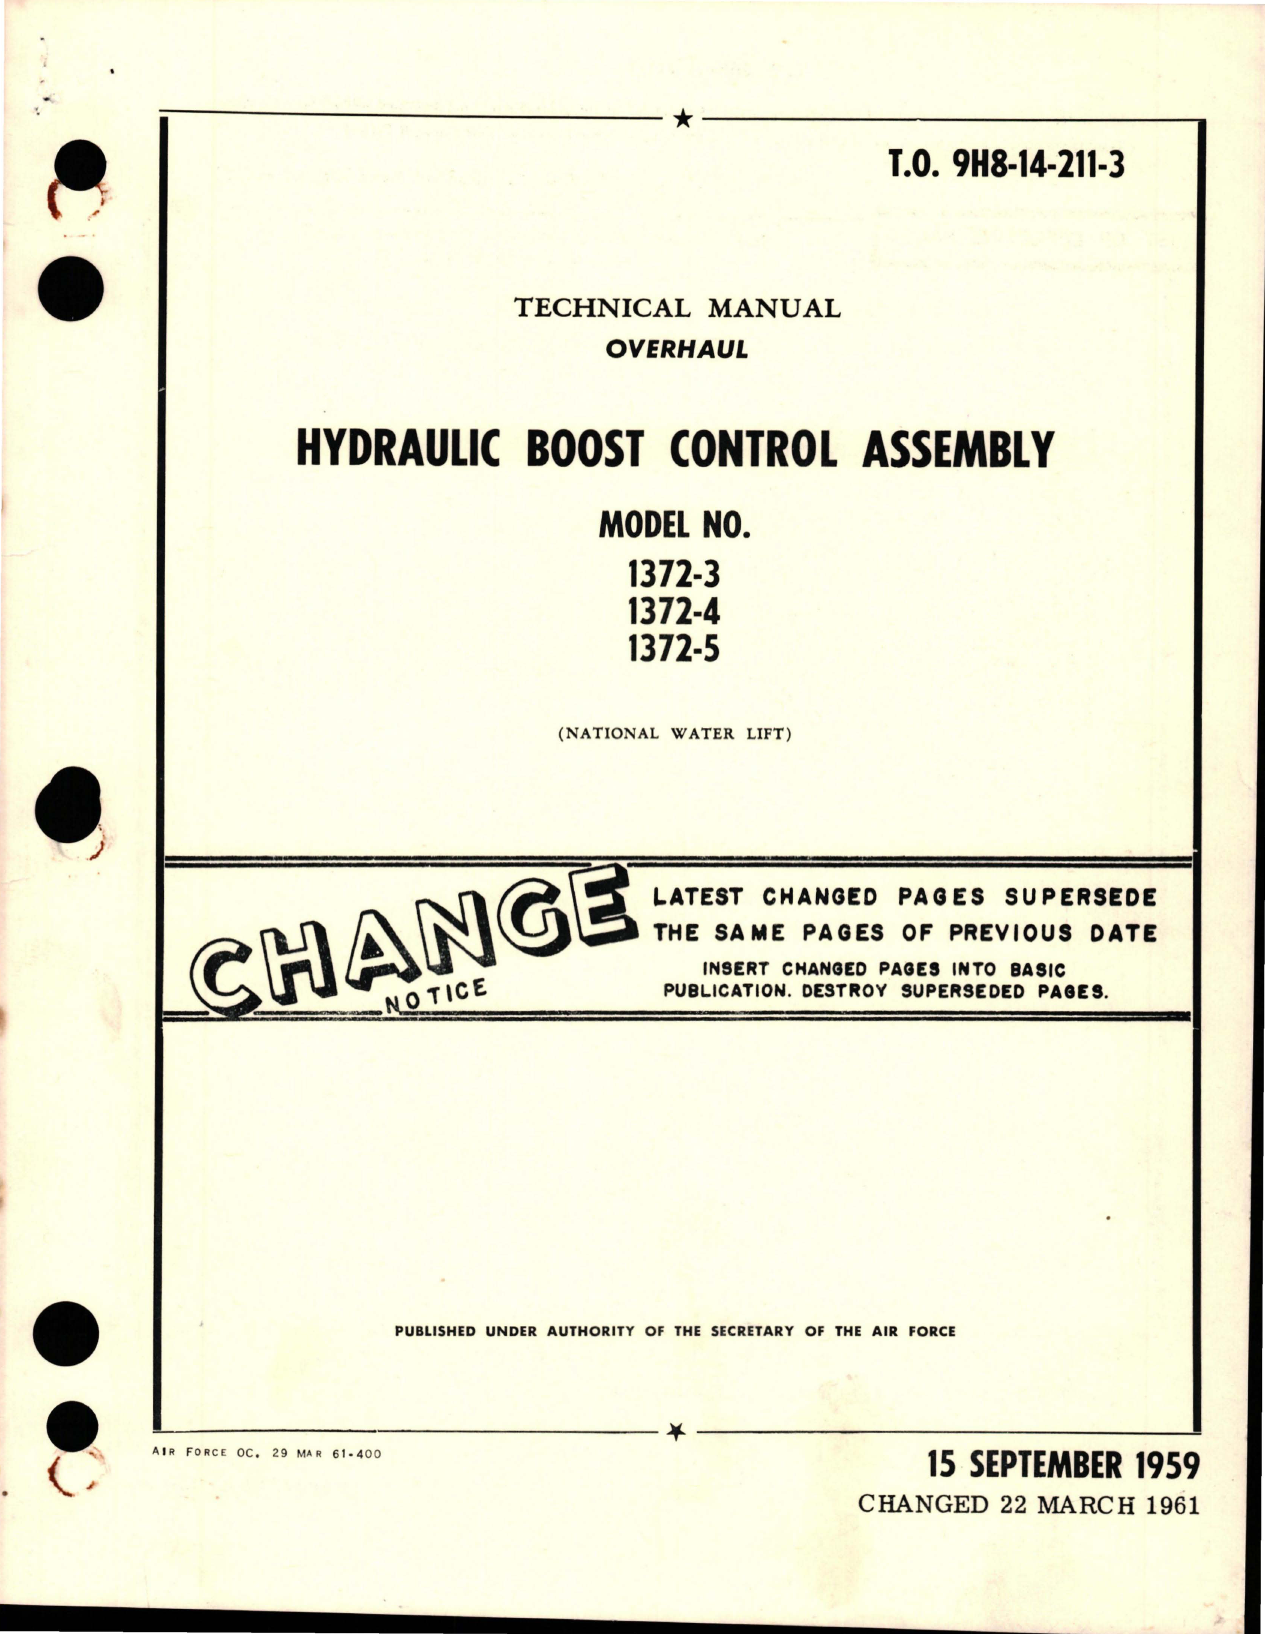 Sample page 1 from AirCorps Library document: Overhaul Manual for Hydraulic Boost Control Assembly - Model 1372-3, 1372-4, and 1372-5